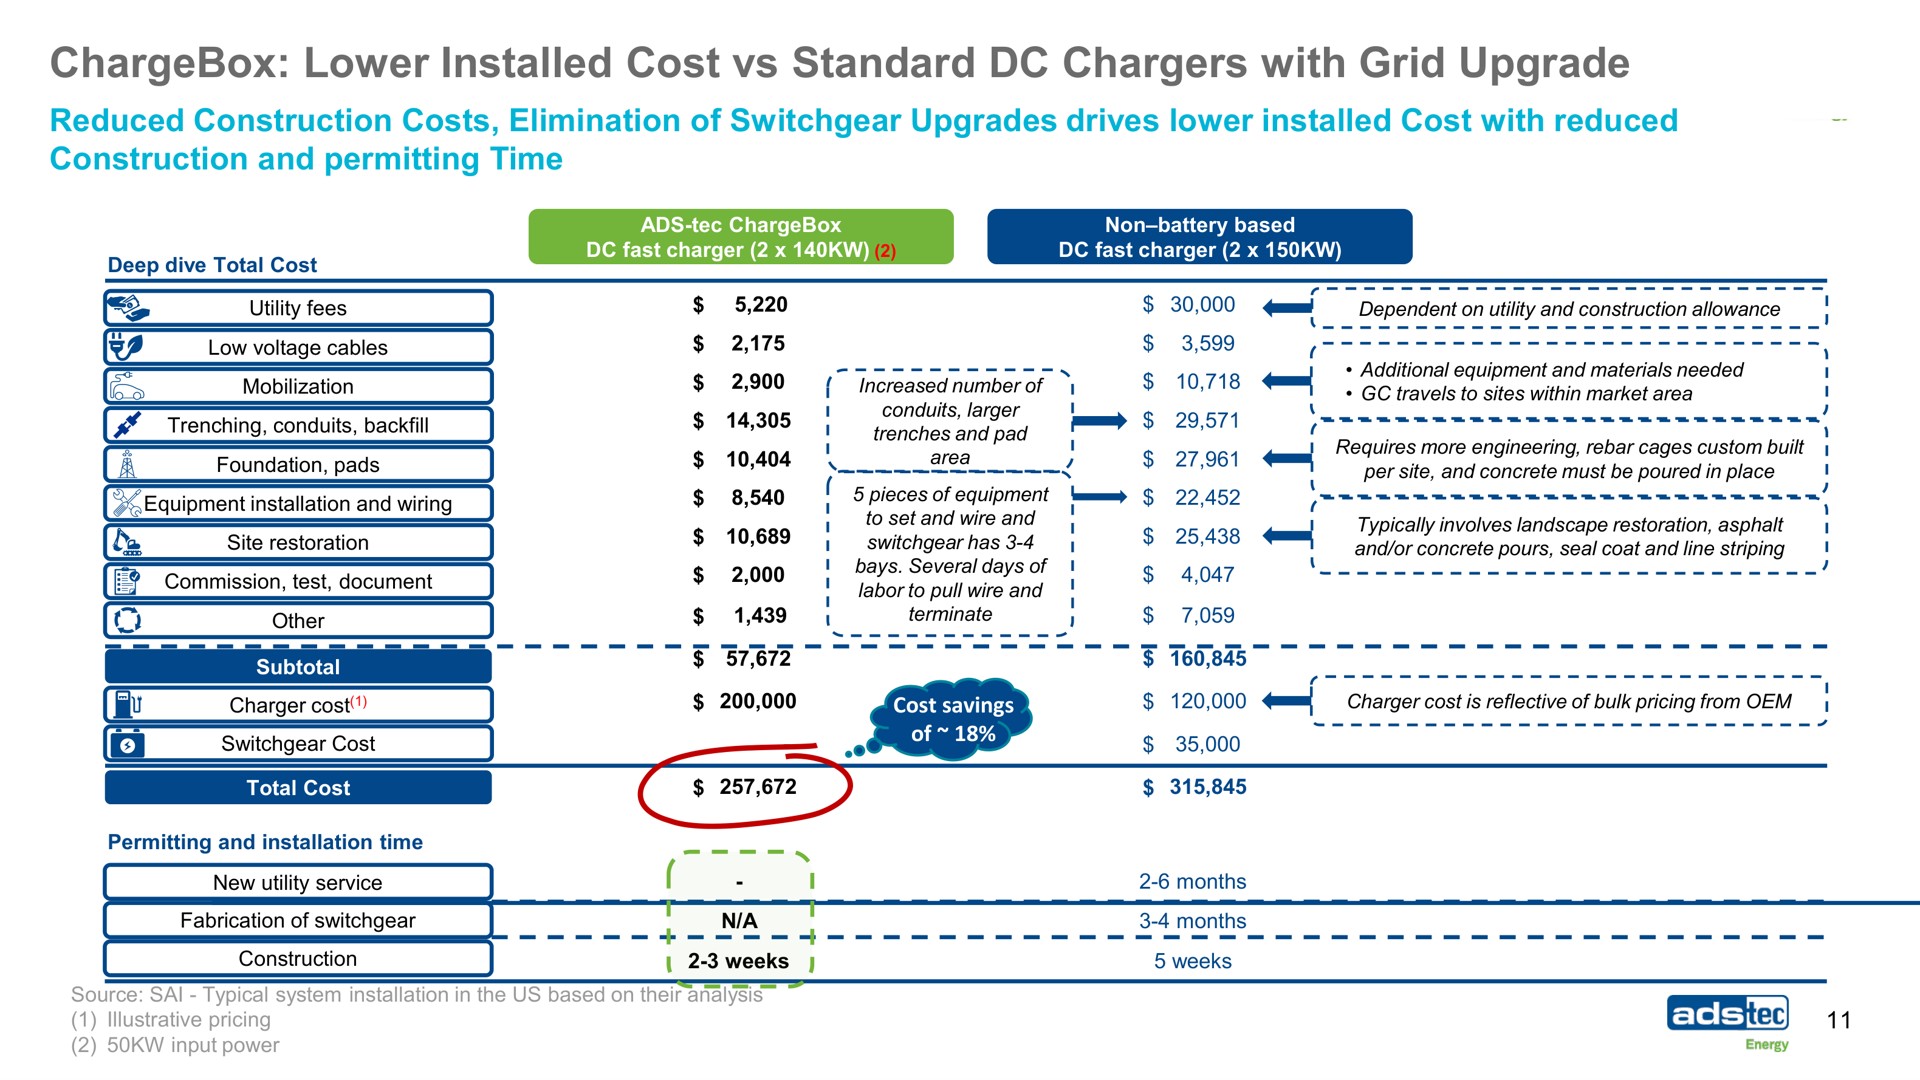 lower cost standard chargers with grid upgrade | ads-tec Energy